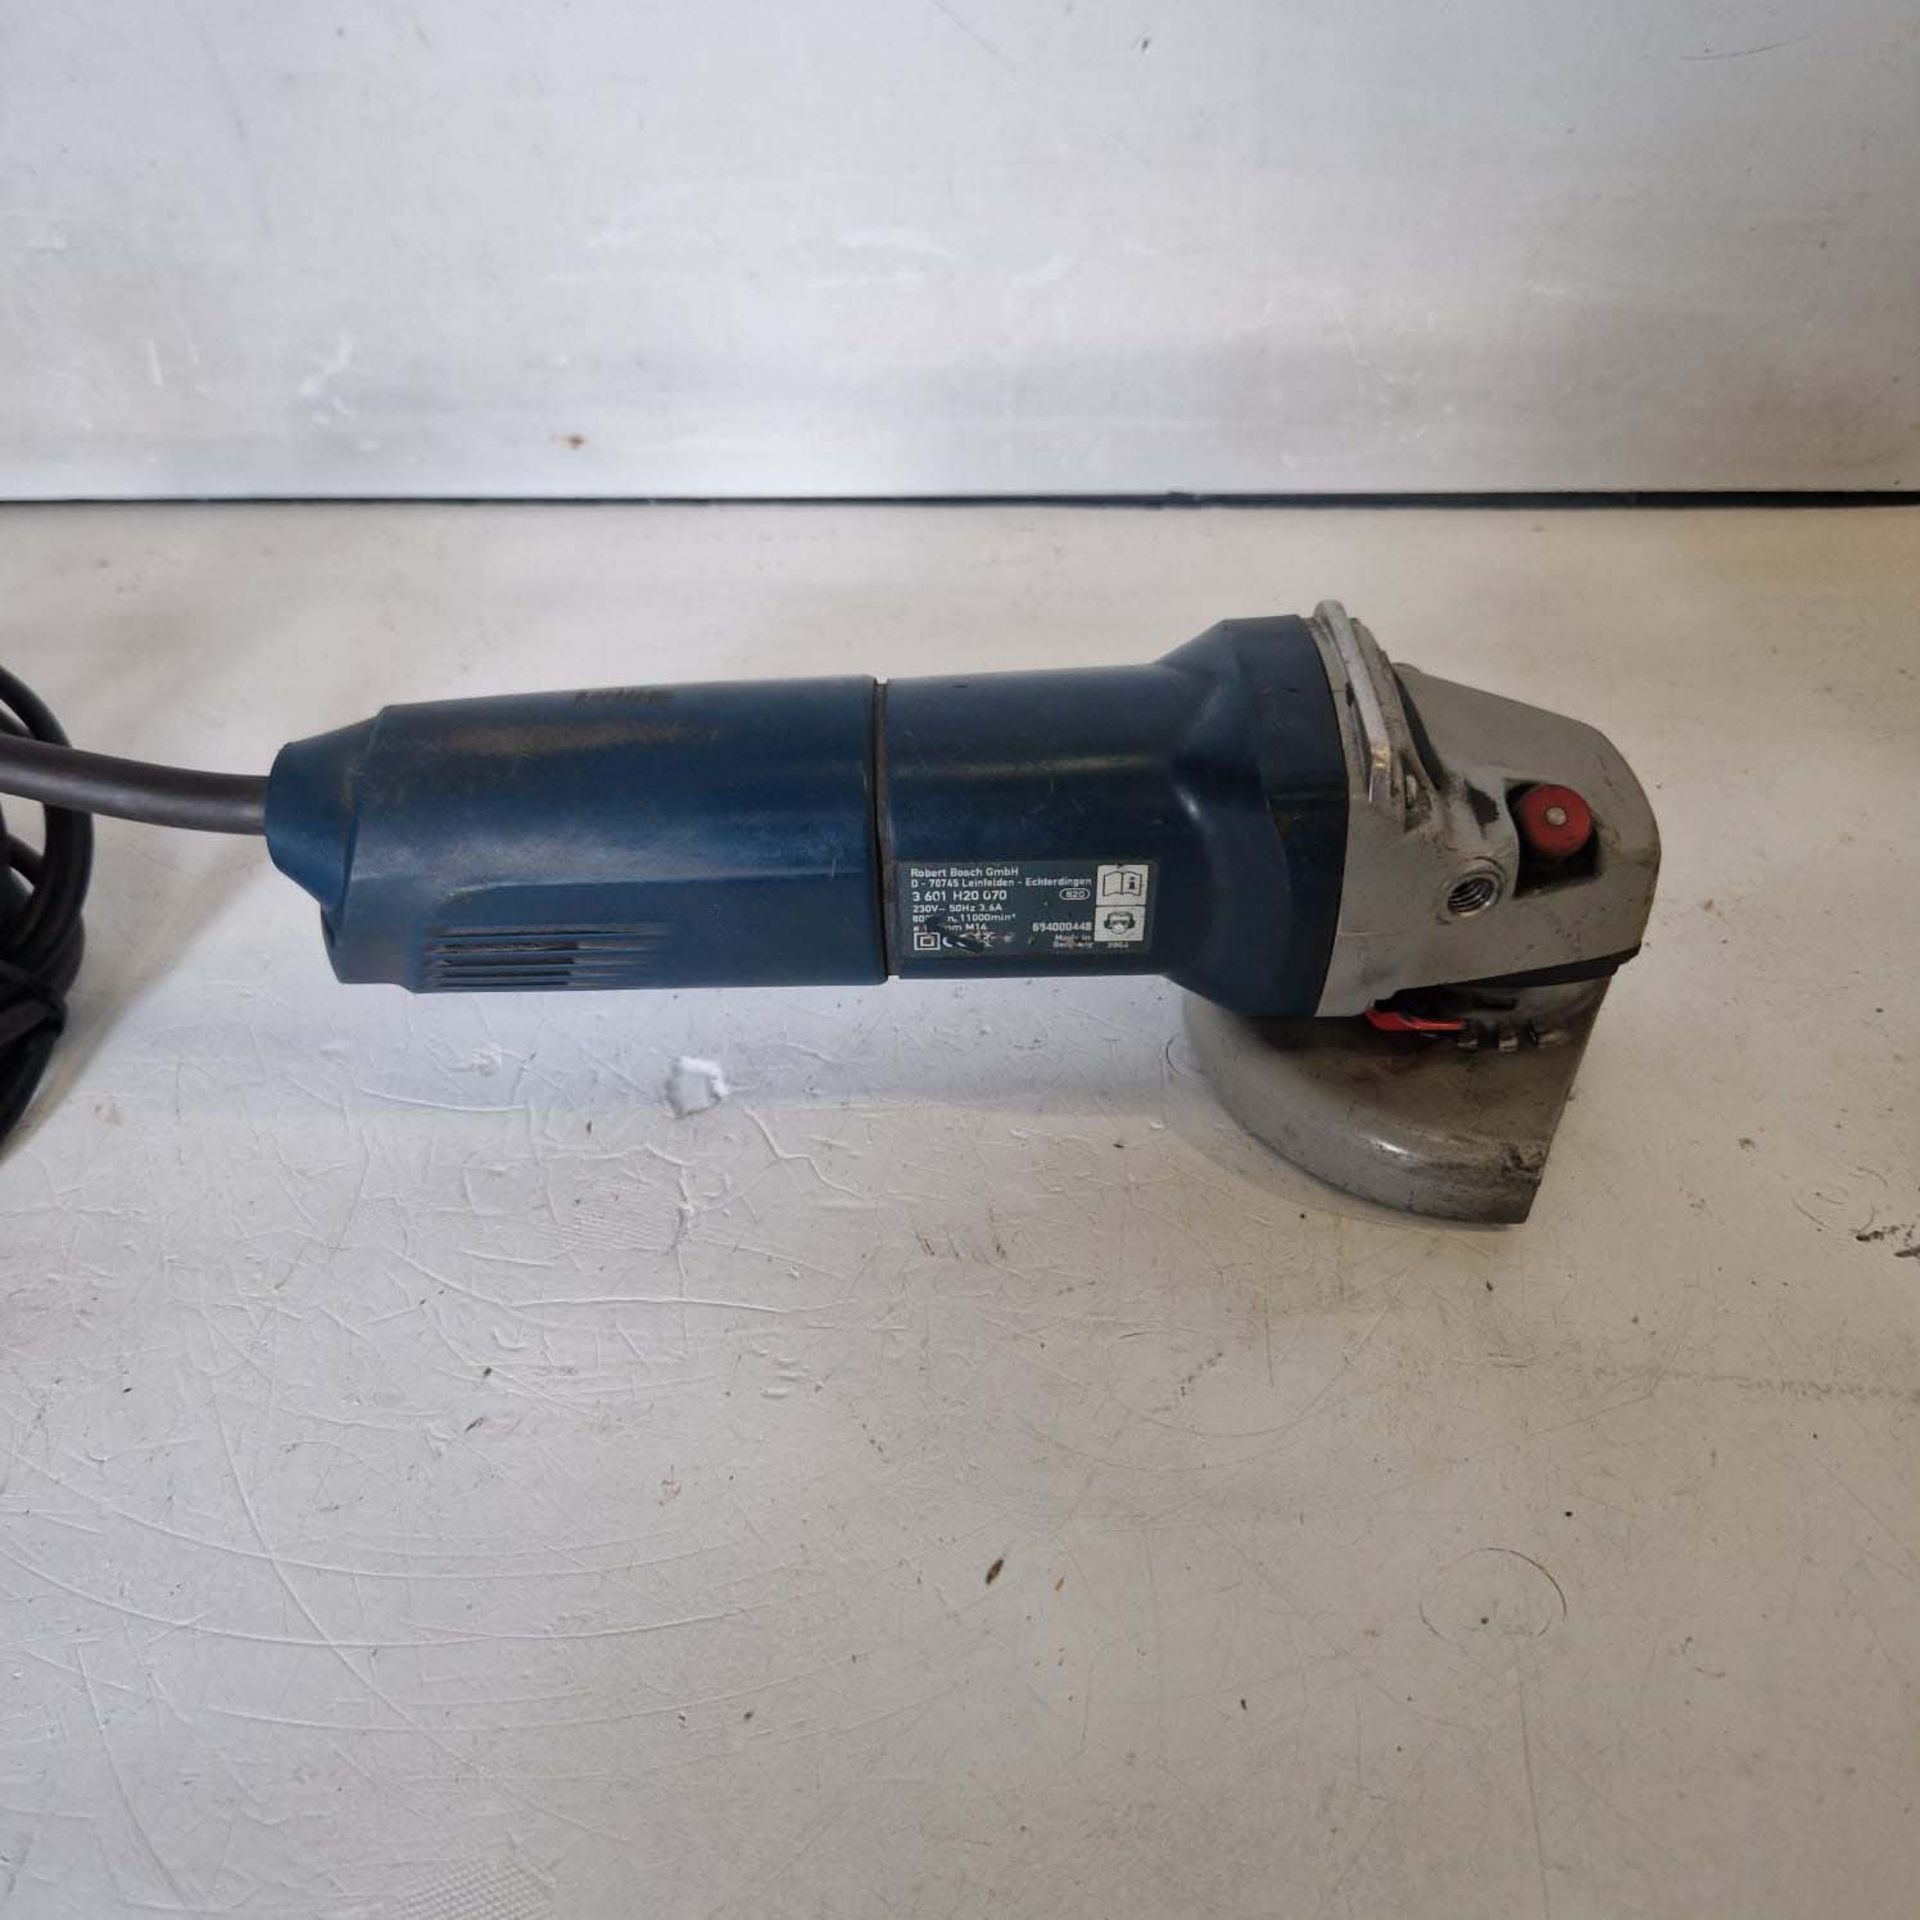 Bosch Model GWS 8-115 Professional Angle Grinder. 115mm Dia x 14mm. 230Volt. 800Watts. - Image 3 of 4